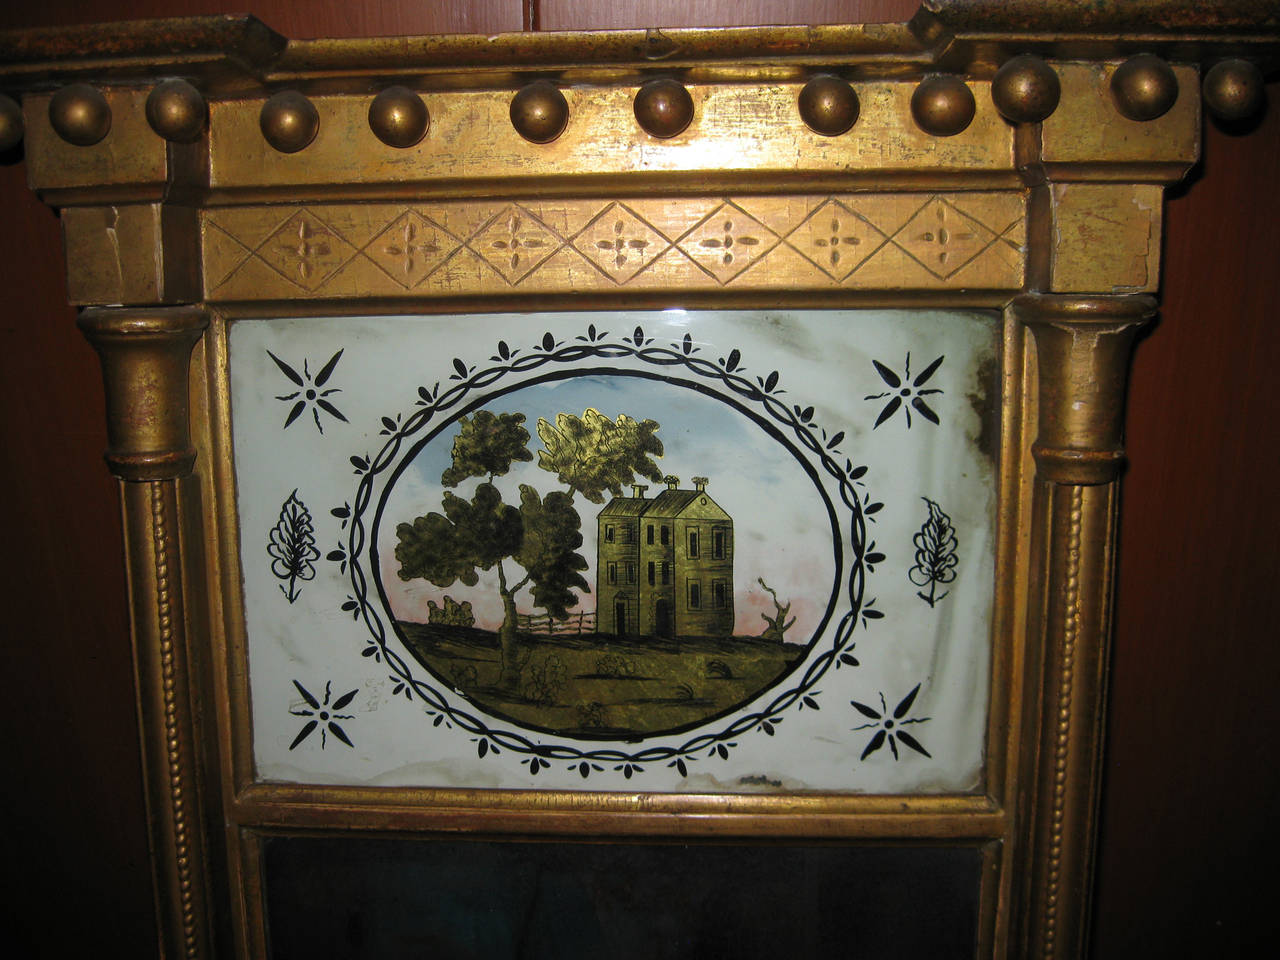 Detailed early 19th century American federal églomisé, or reverse painted giltwood mirror featuring a primitive house with three chimneys. It came from a Philadelphia home and is in very good condition for the age; note some loss to gilding and